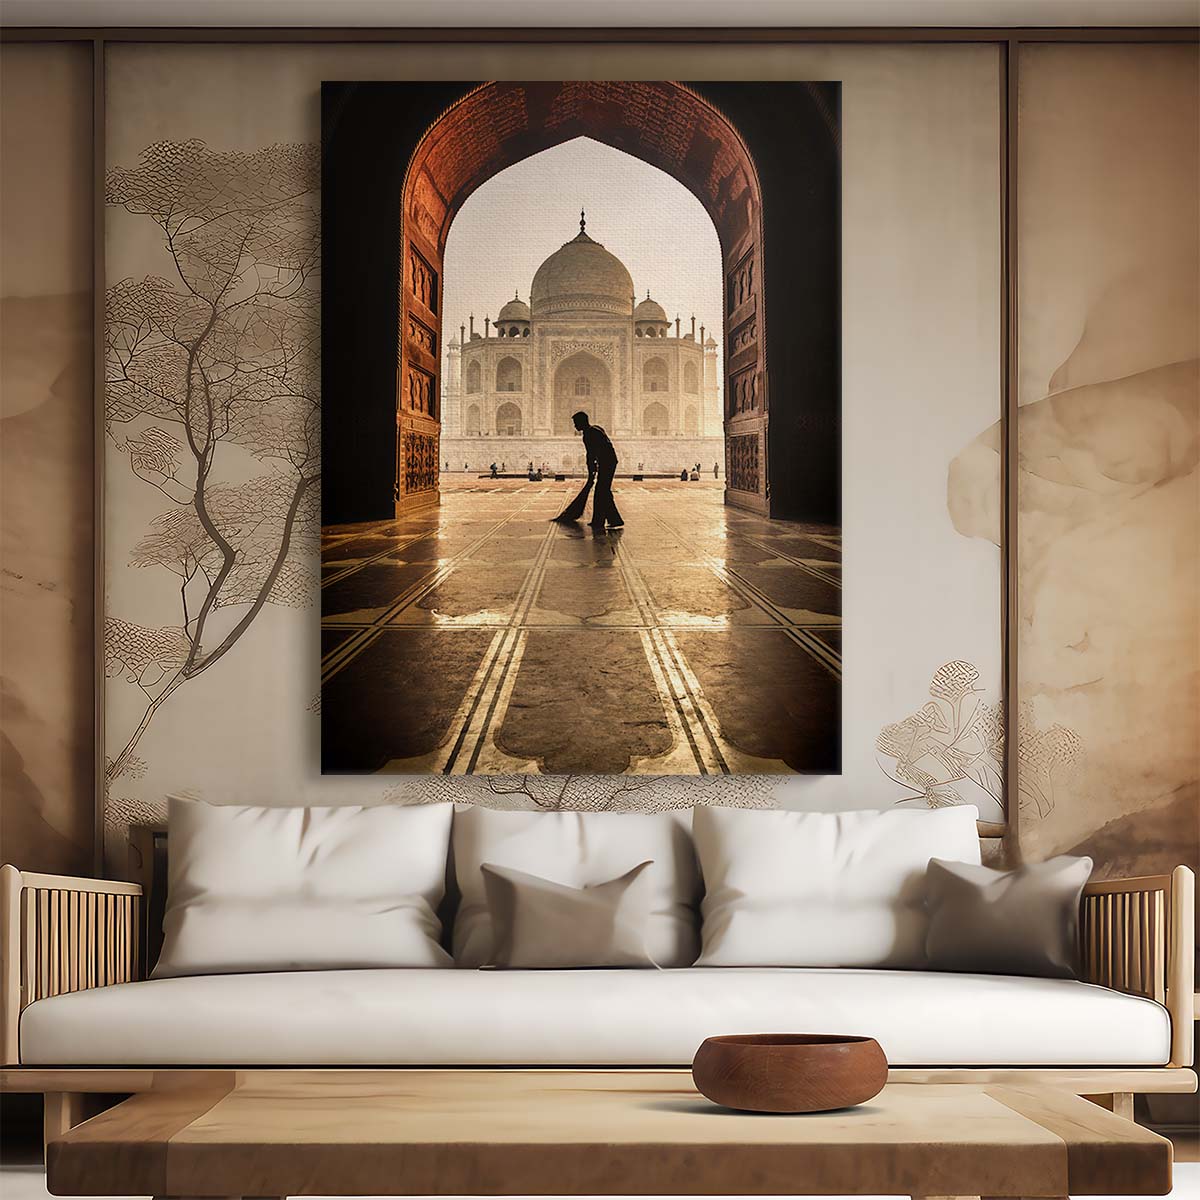 Dawn Cleaning at Taj Mahal - Iconic Indian Architecture Photography Art by Luxuriance Designs, made in USA